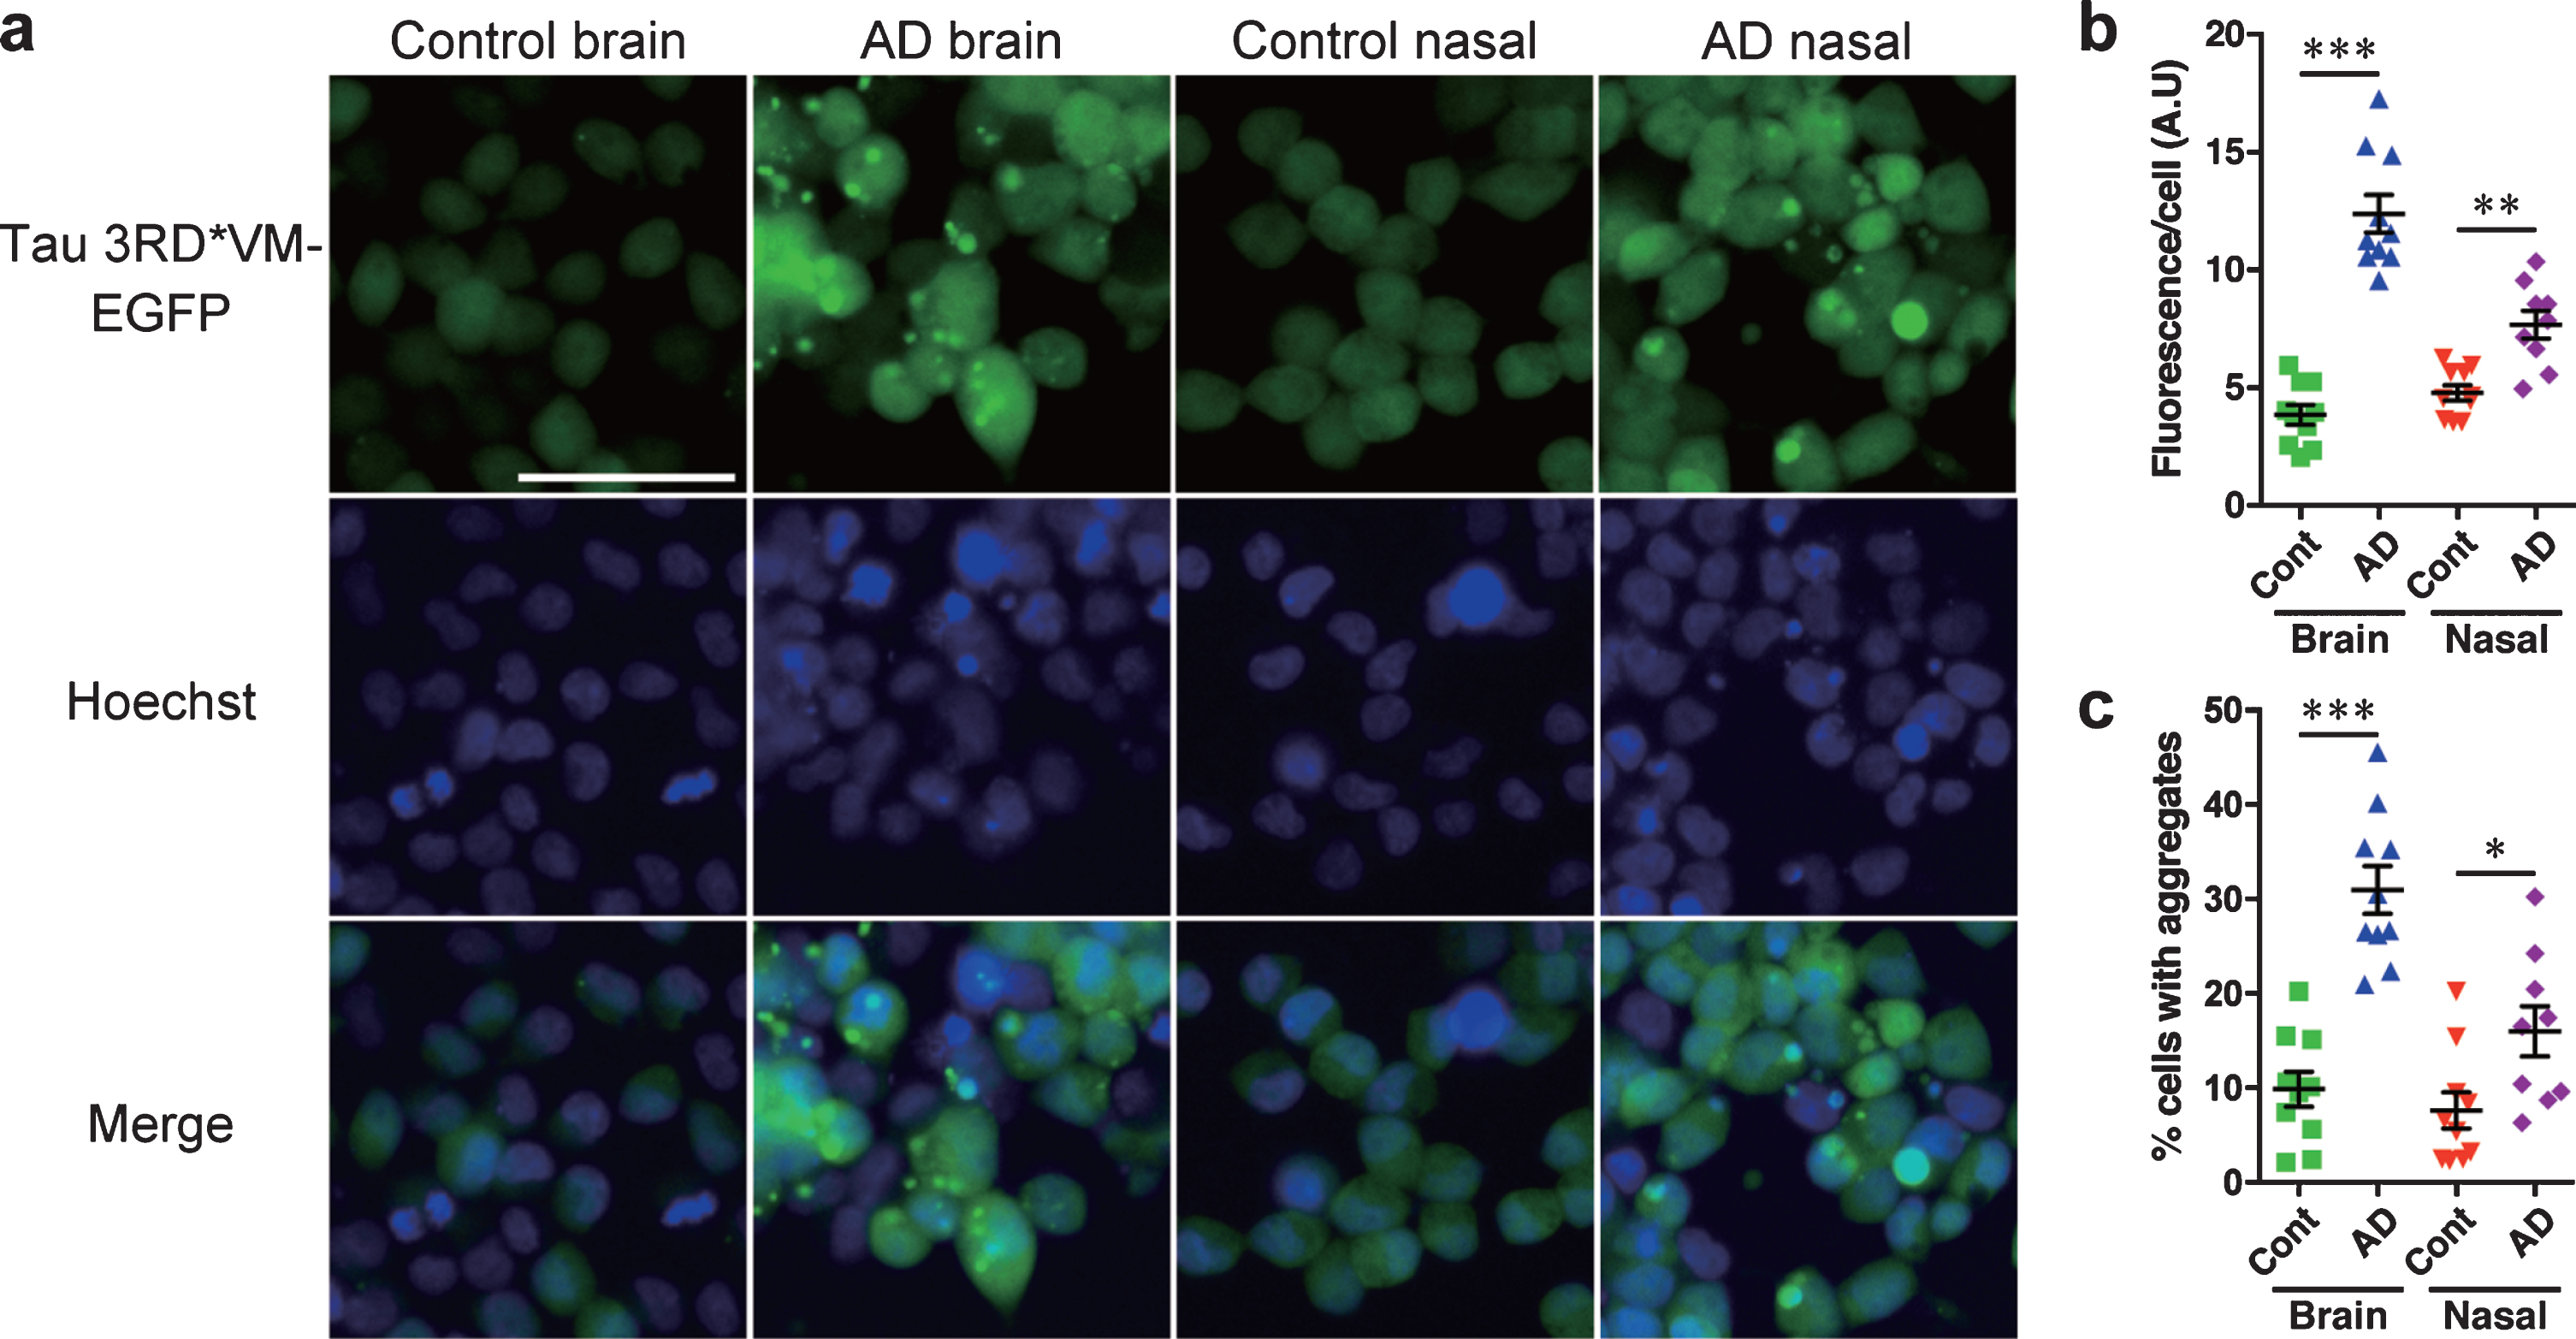 HEK 293T cells stably expressing tau 3RD*VM-EGFP detect tau prions in the brain and nasal tissue homogenates from patients with AD. Brain and nasal tissue homogenates from control and AD patient samples were diluted in DPBS and incubated for 4 days with 3RD*VM-EGFP-expressing cells. a) Representative images of HEK 293T cells expressing 3RD*VM-EGFP seeded with the brain and nasal tissue homogenates from control individuals and patients with AD. Scale bar = 50μm. Quantification of tau aggregation by (b) fluorescence per cell. Data are presented as the mean±SEM measured from 10 samples per group, with the exception of AD nasal homogenates, for which nine samples were used, and (c) percentage of cells with aggregates. Data are presented as the mean±SEM measured from five images for each sample. *p < 0.05, **p < 0.001, ****p < 0.0001.